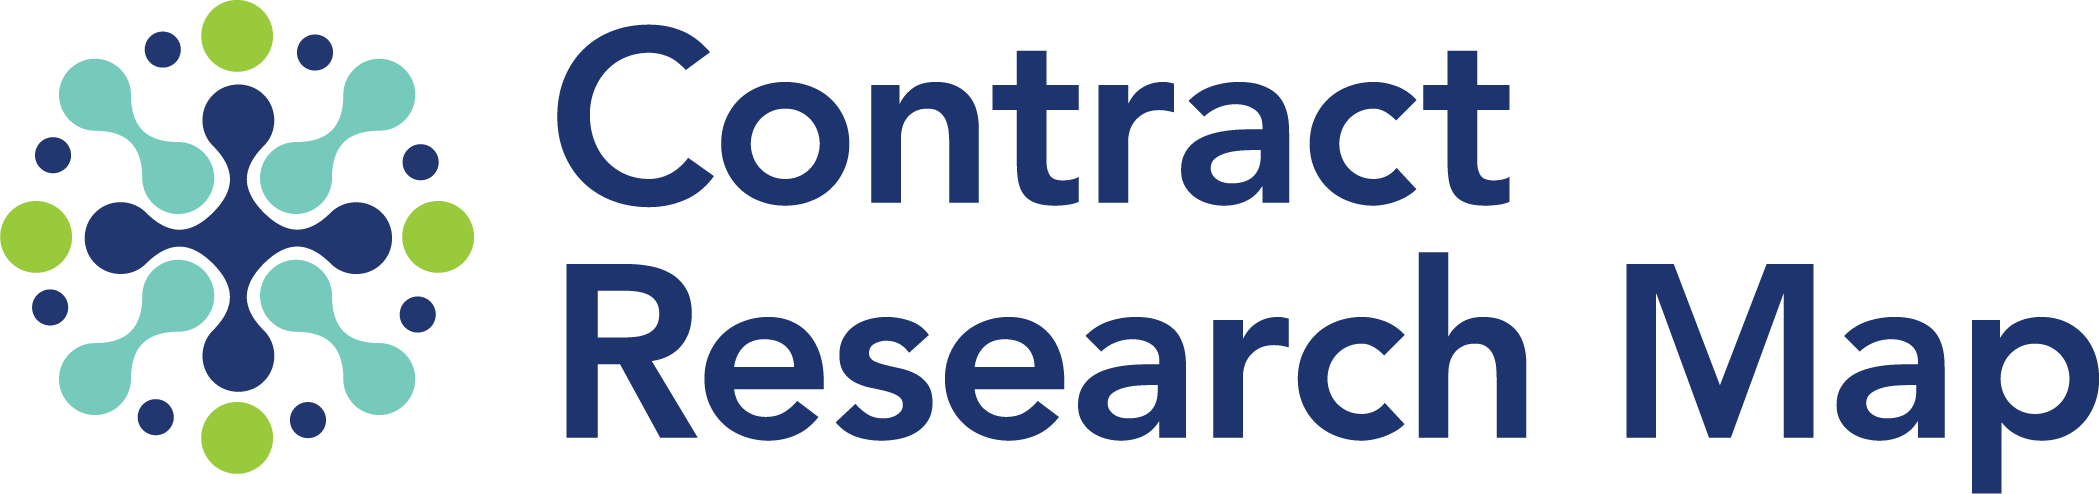 https://www.contractresearchmap.com/images/main-logo.png